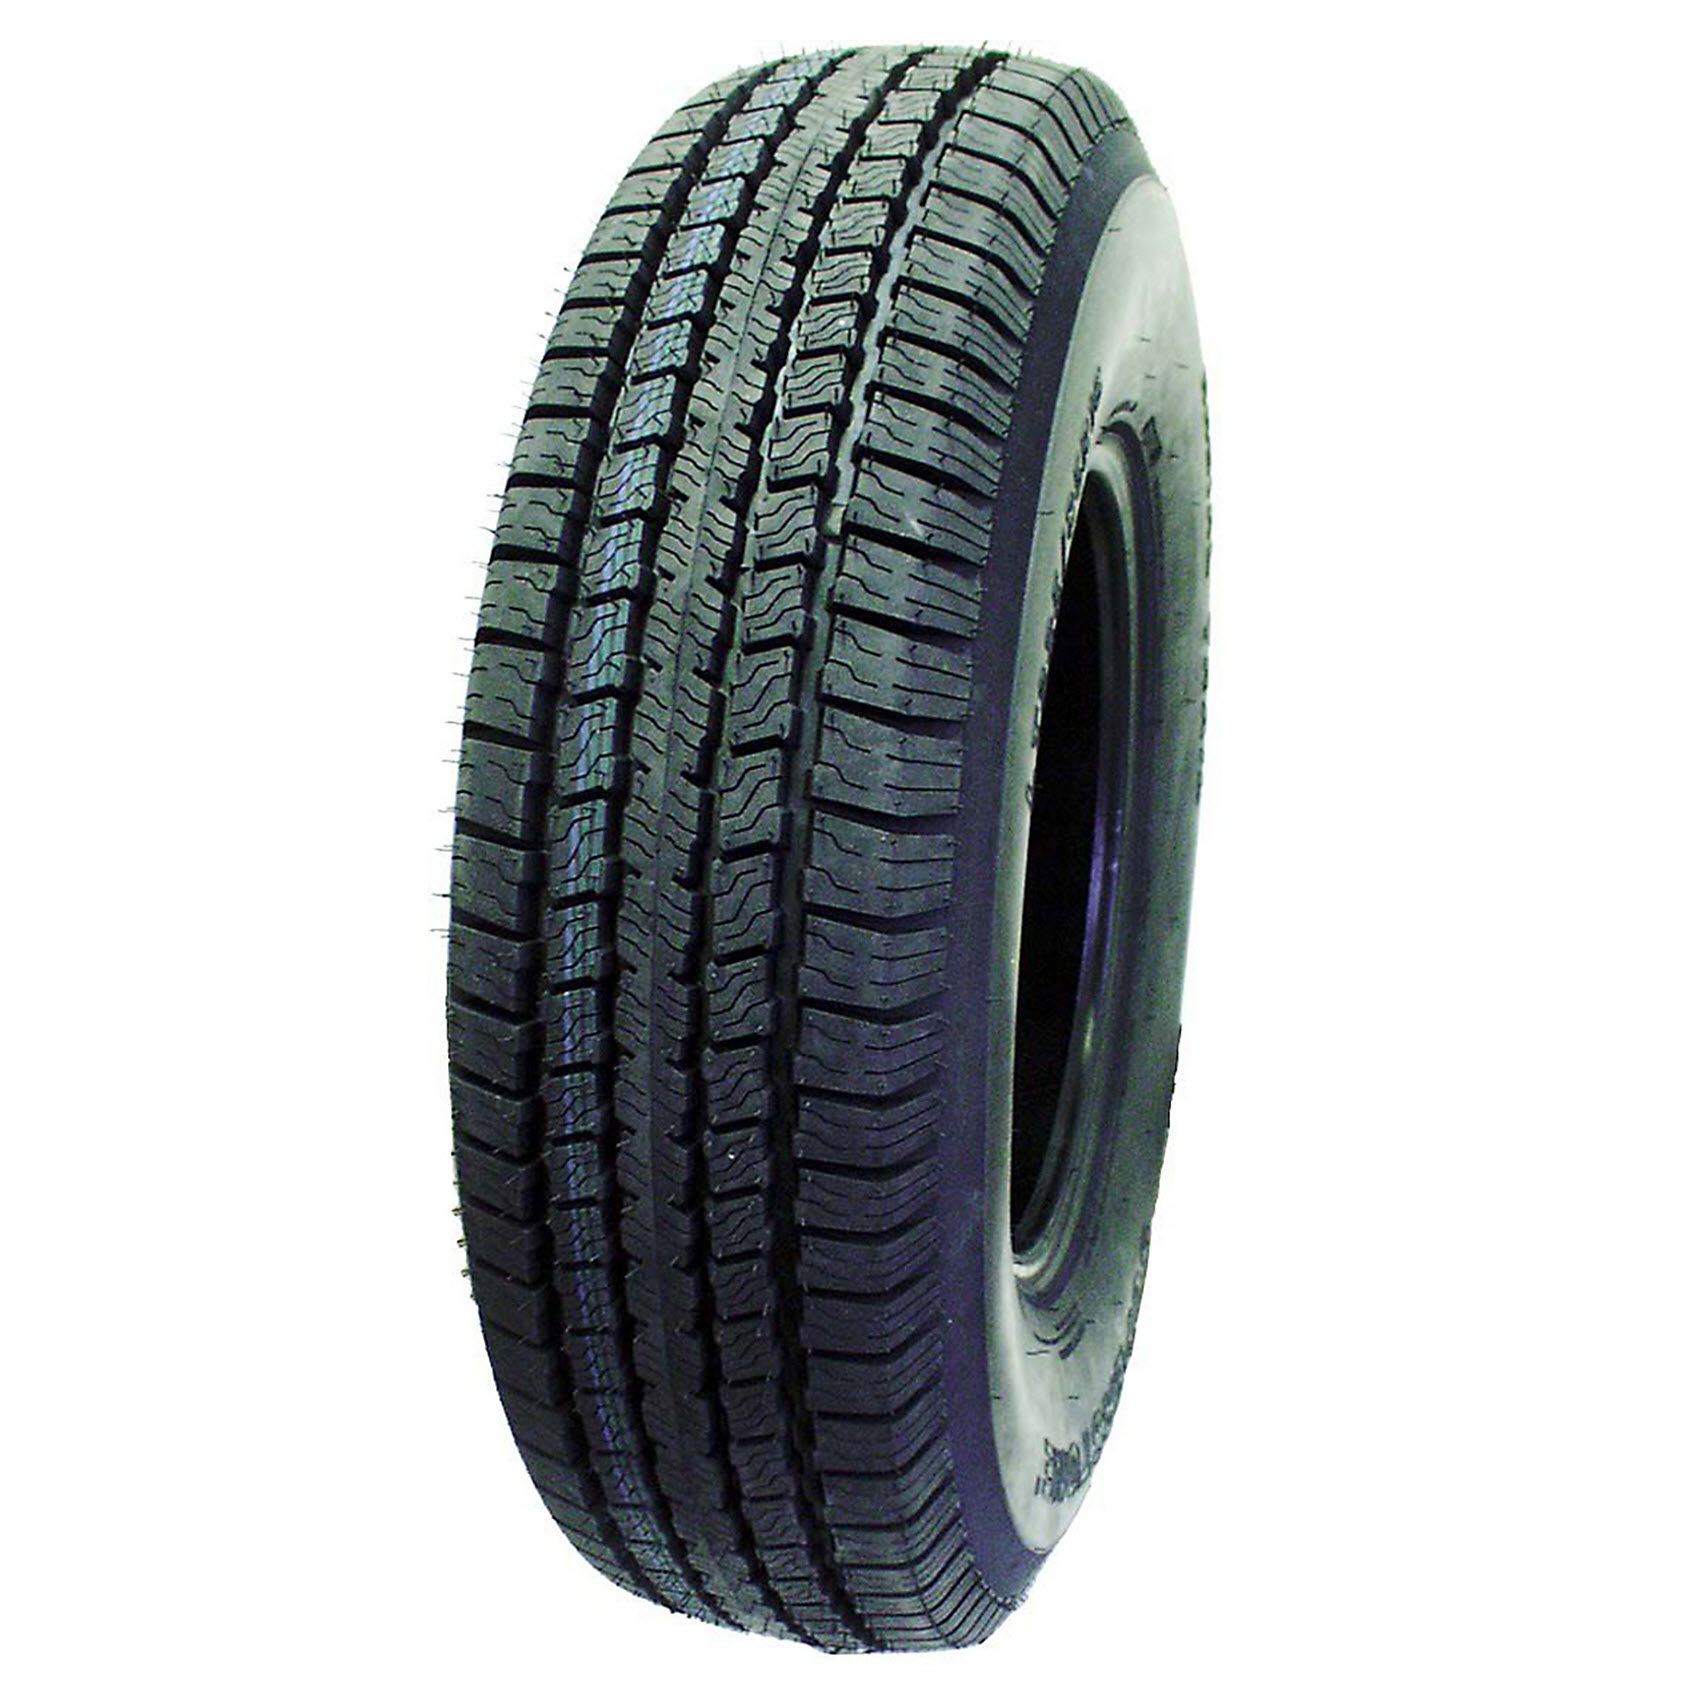 Super Cargo PM1033 St Tires St205/75r14 6ply